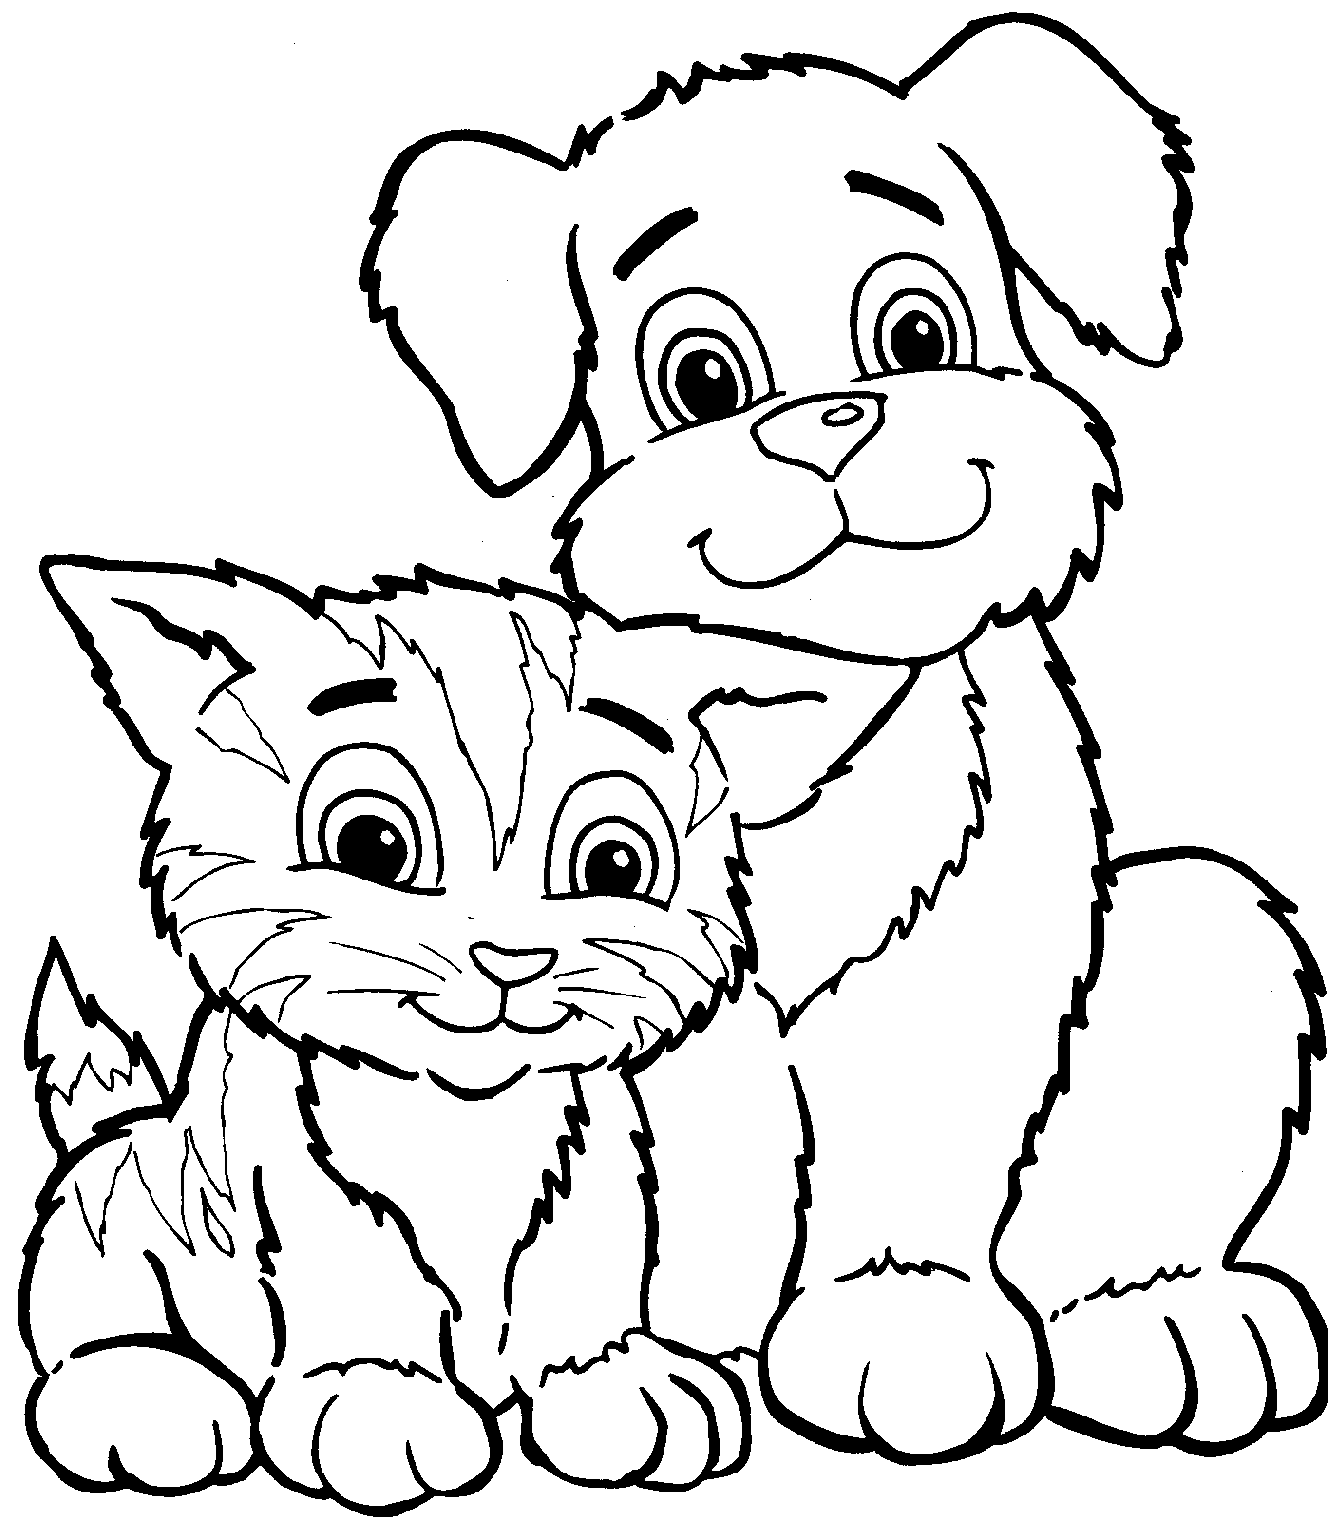 Cat Colouring Pages Free Printable - High Quality Coloring Pages